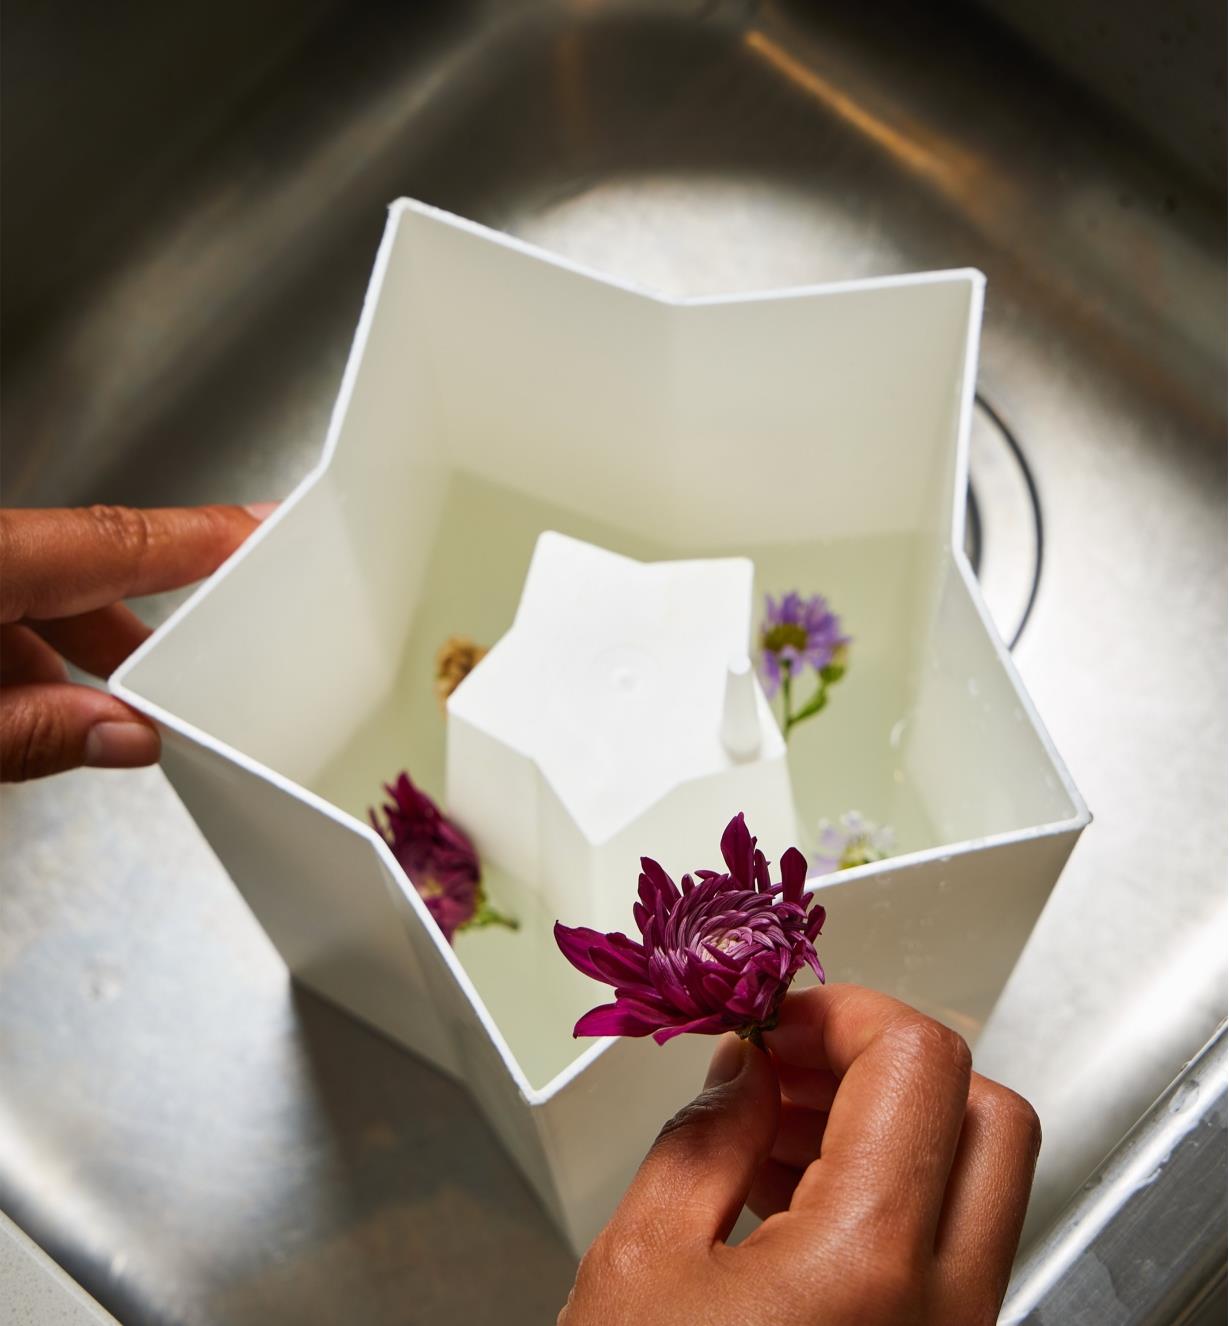 Filling an ice lantern mold with water and flowers